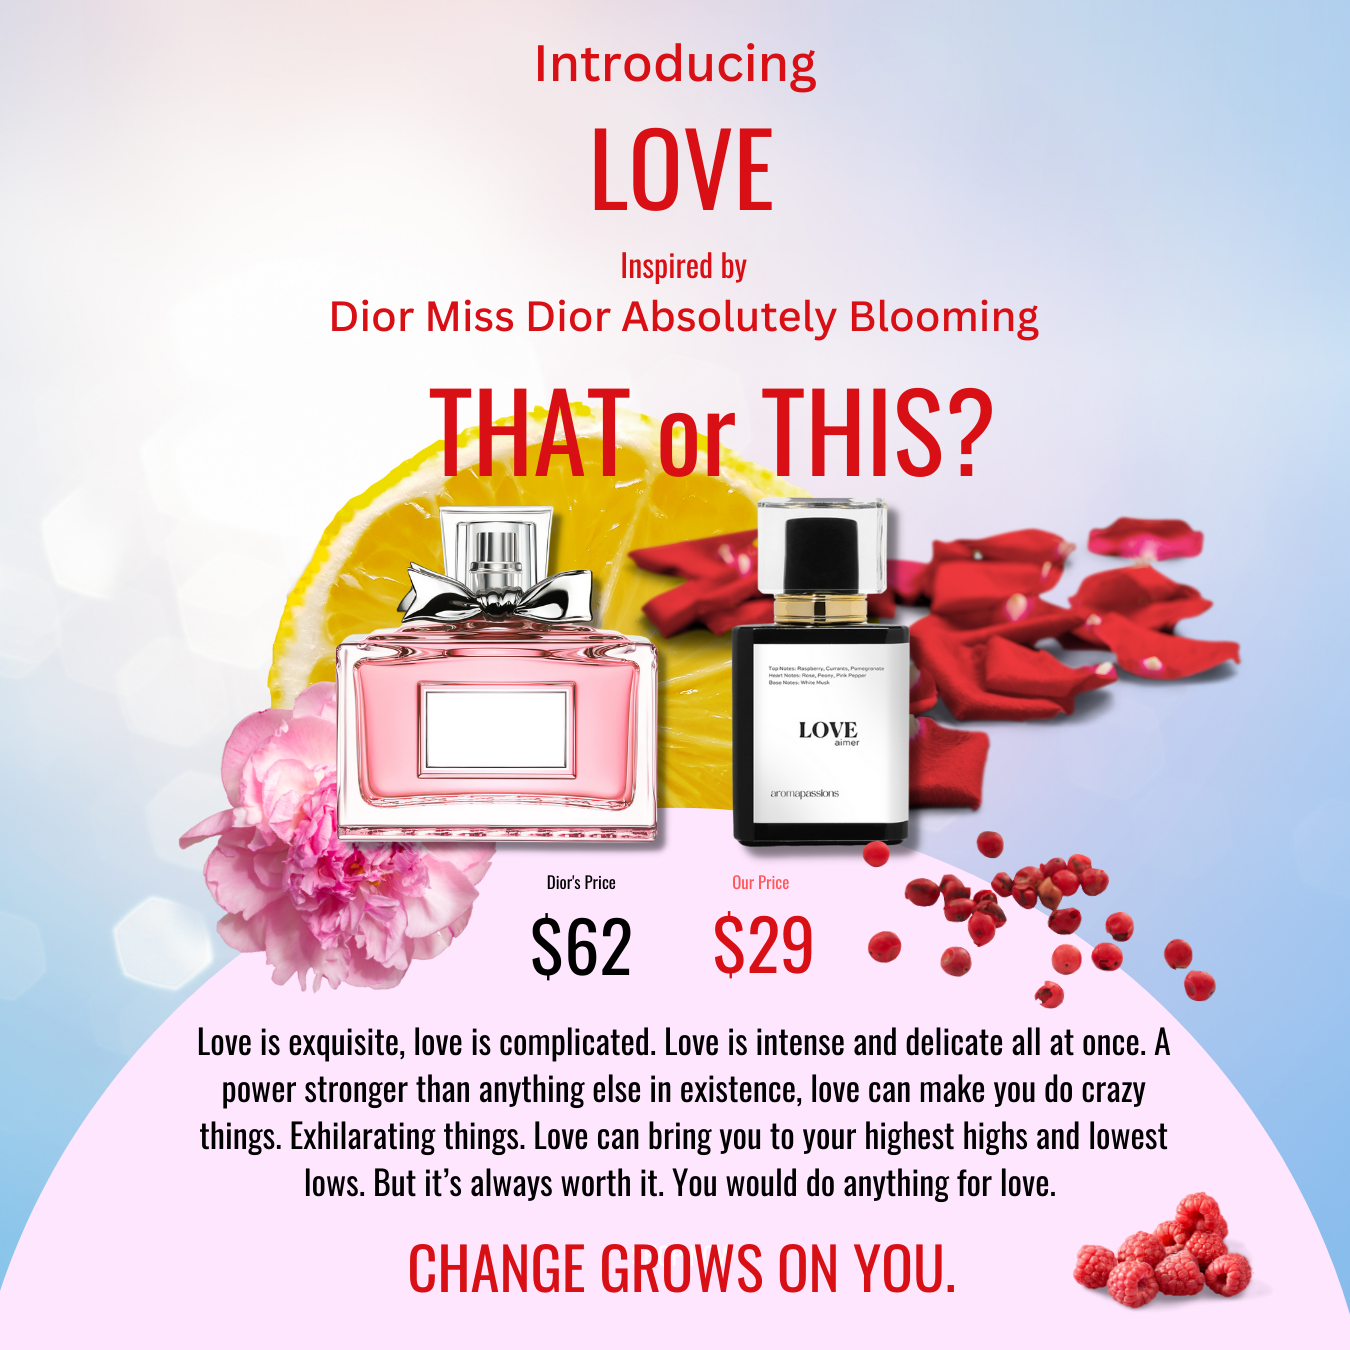 LOVE | Inspired by MISS D. ABSOLUTELY BLOOMING | Absolutely Blooming Dupe Pheromone Perfume